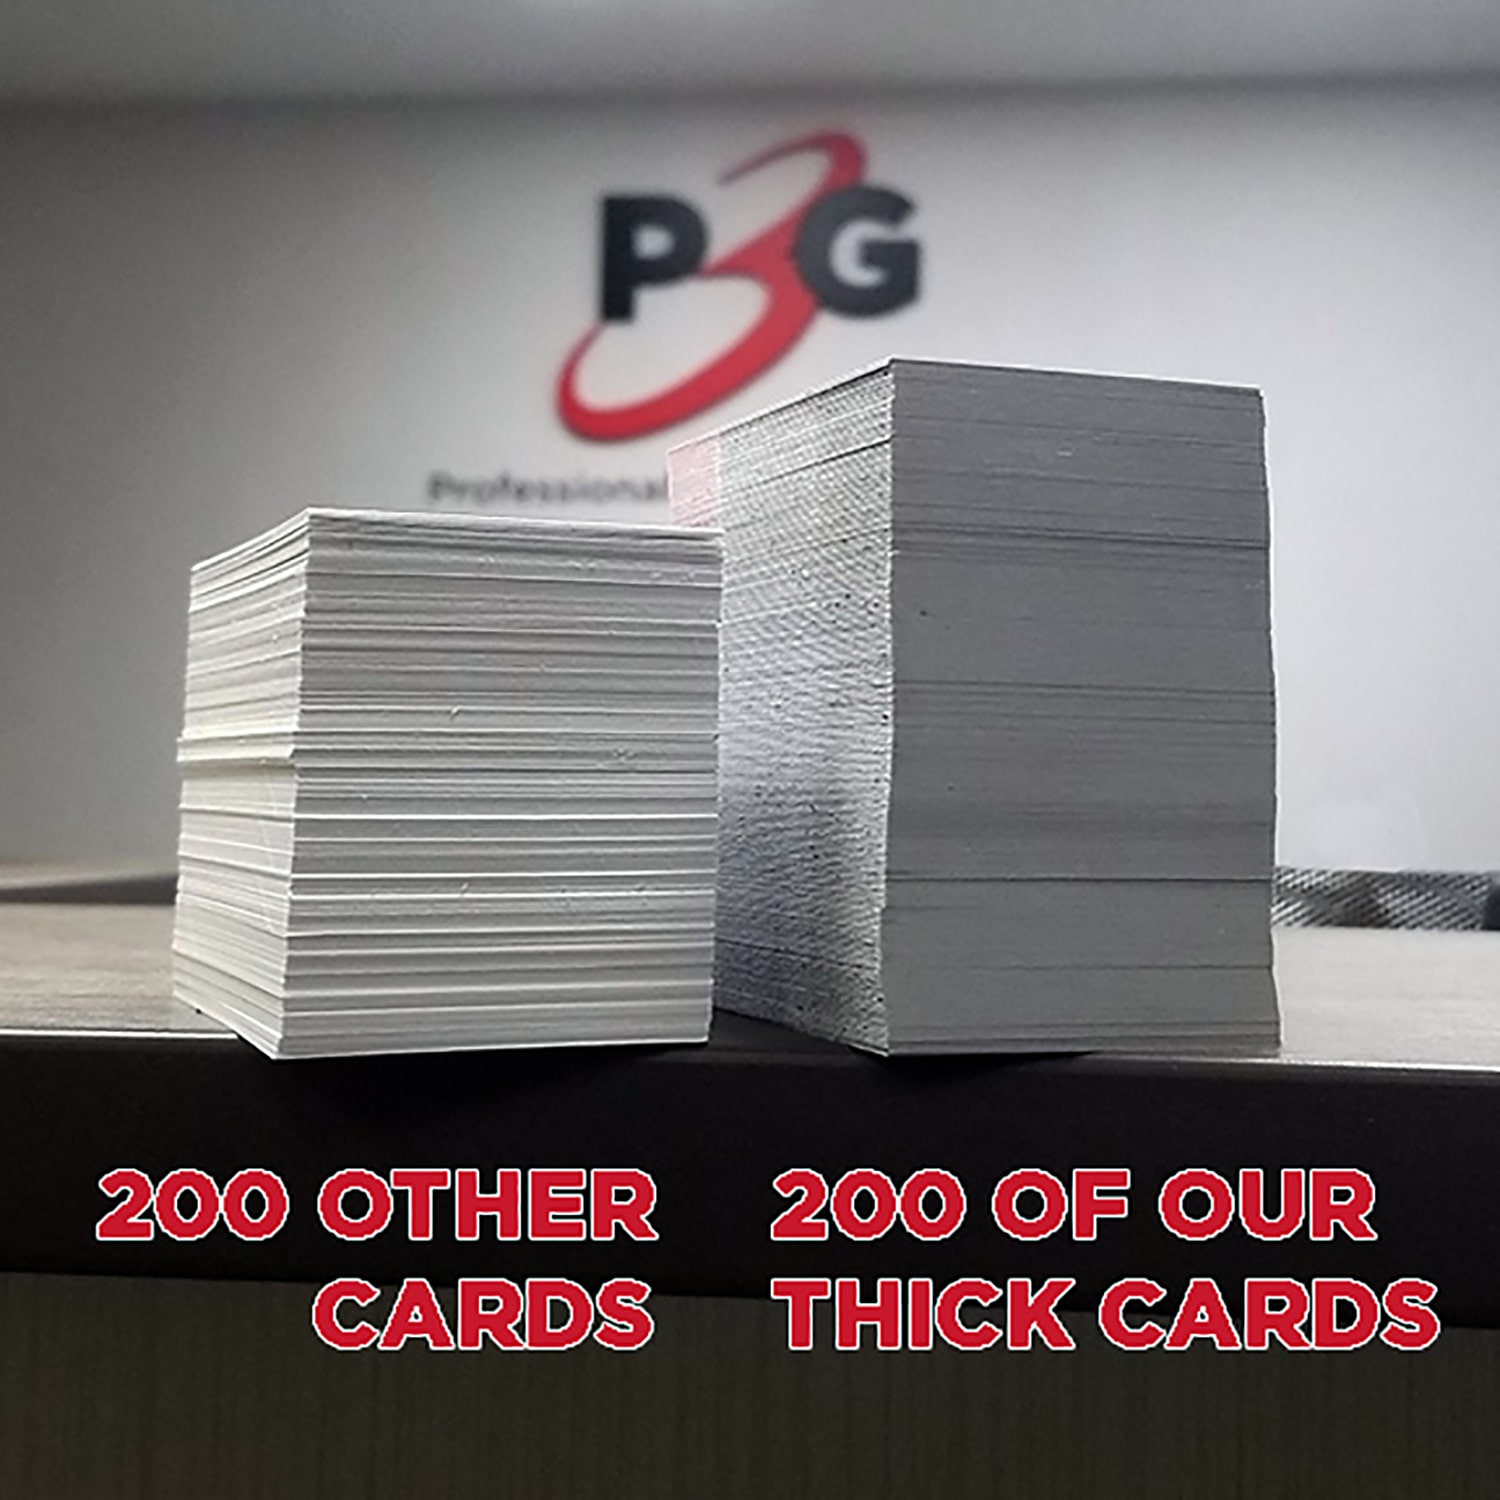 Business Cards Printing in Grand Rapids MI - Phase3Graphics.com